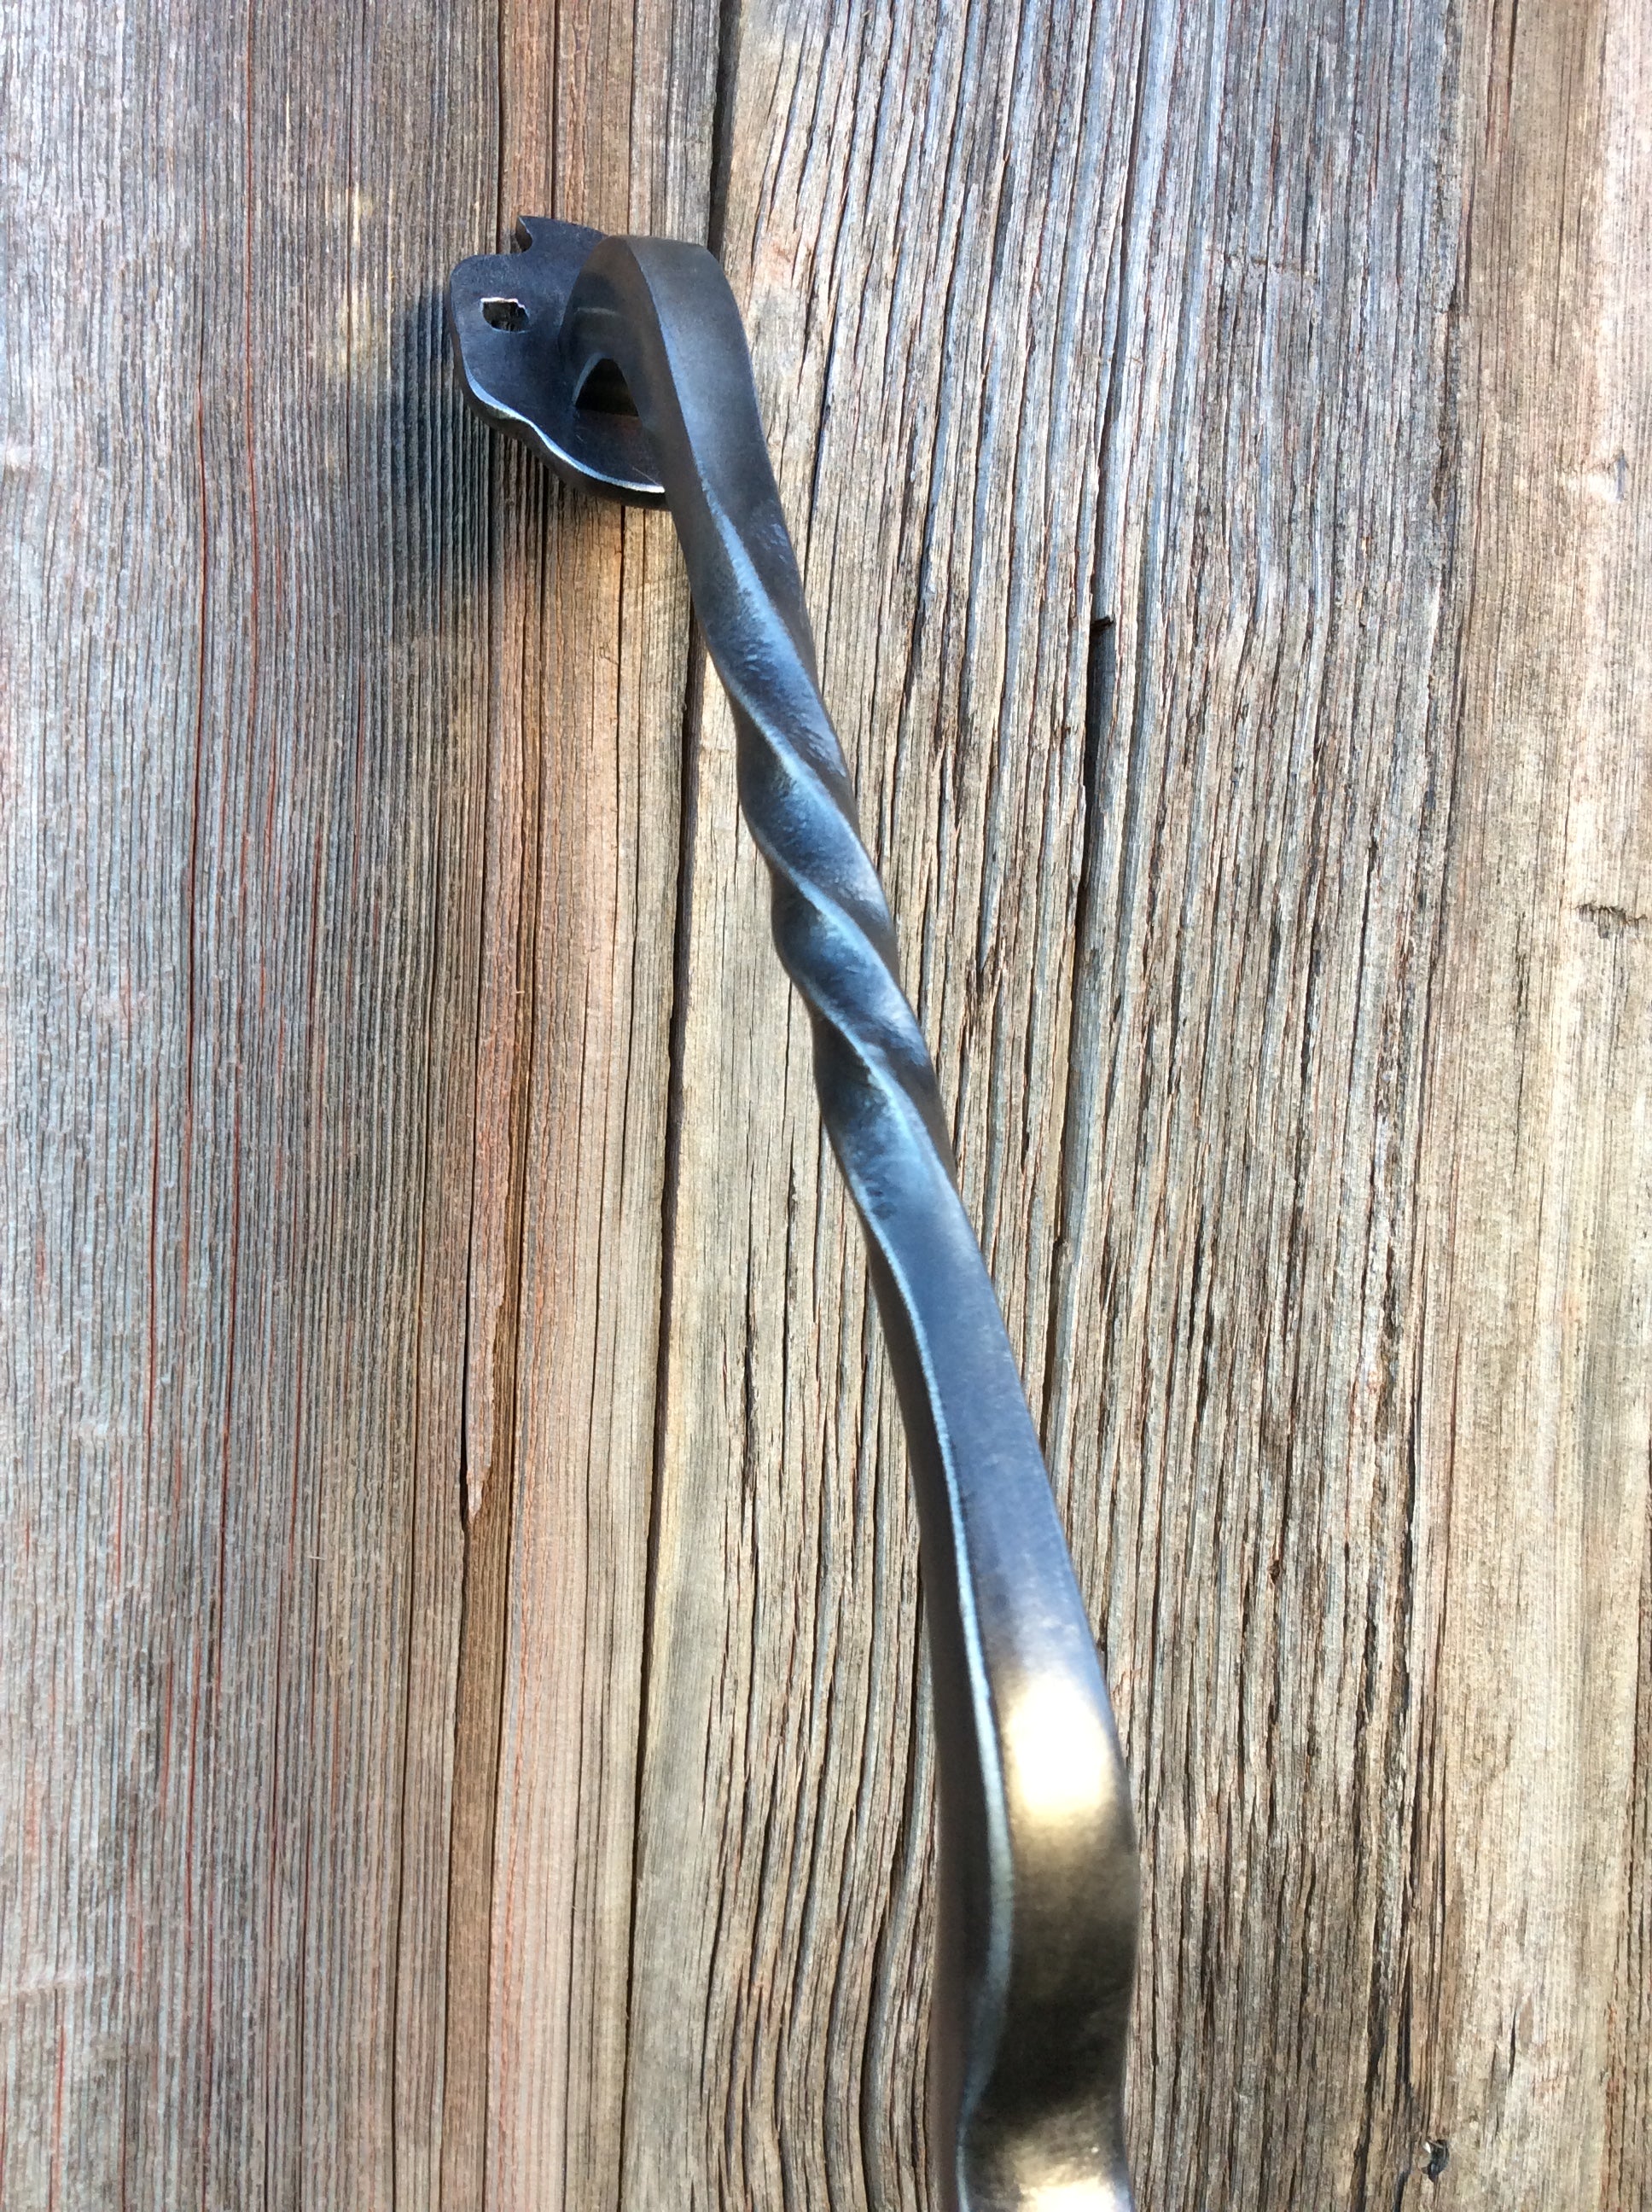 forged iron pull style door handle for interior loft or barn door. 24 inches long in brushed silver.